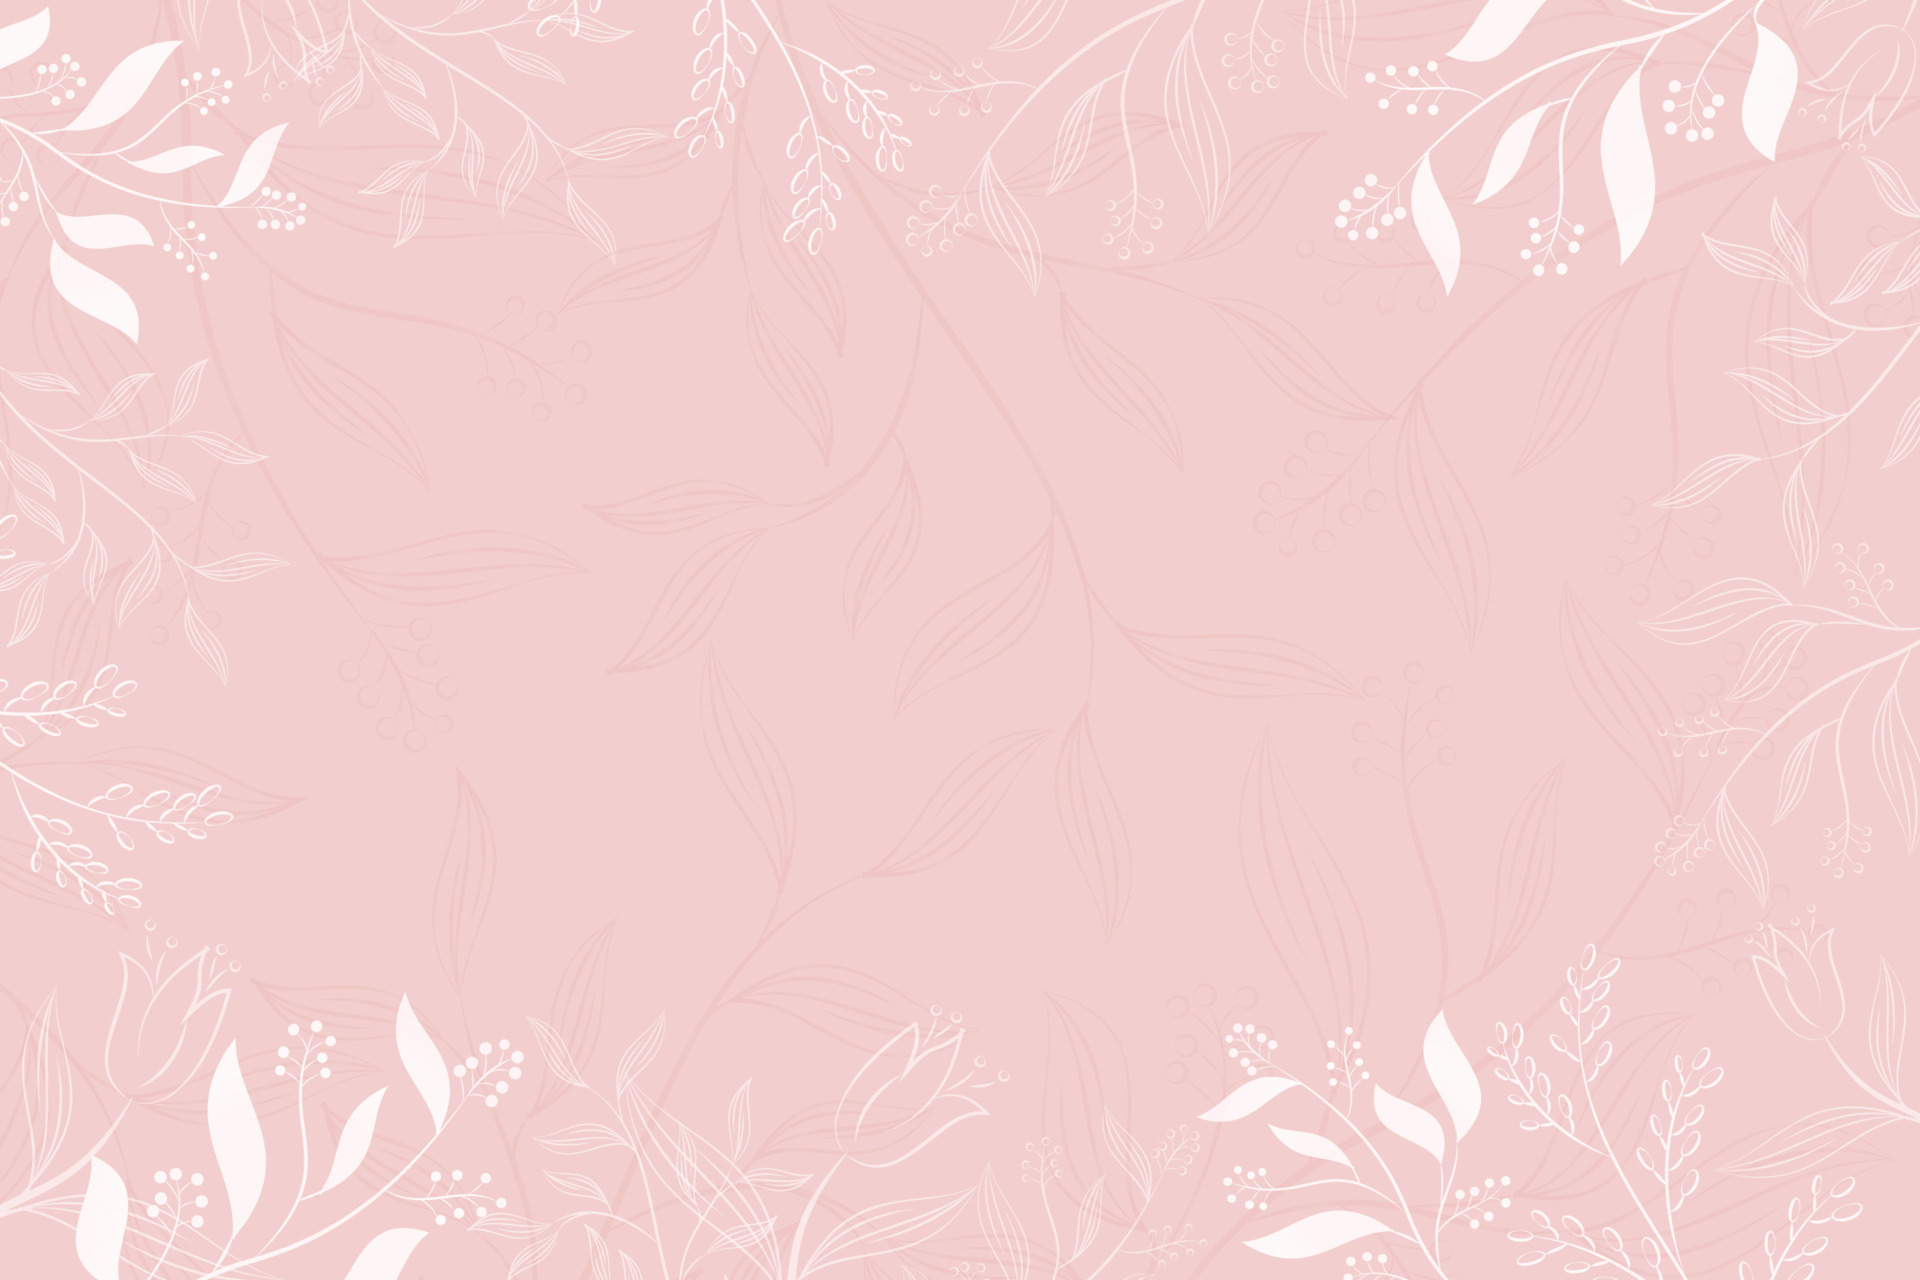 Floral Frame Background Graphic by Fstock  Creative Fabrica